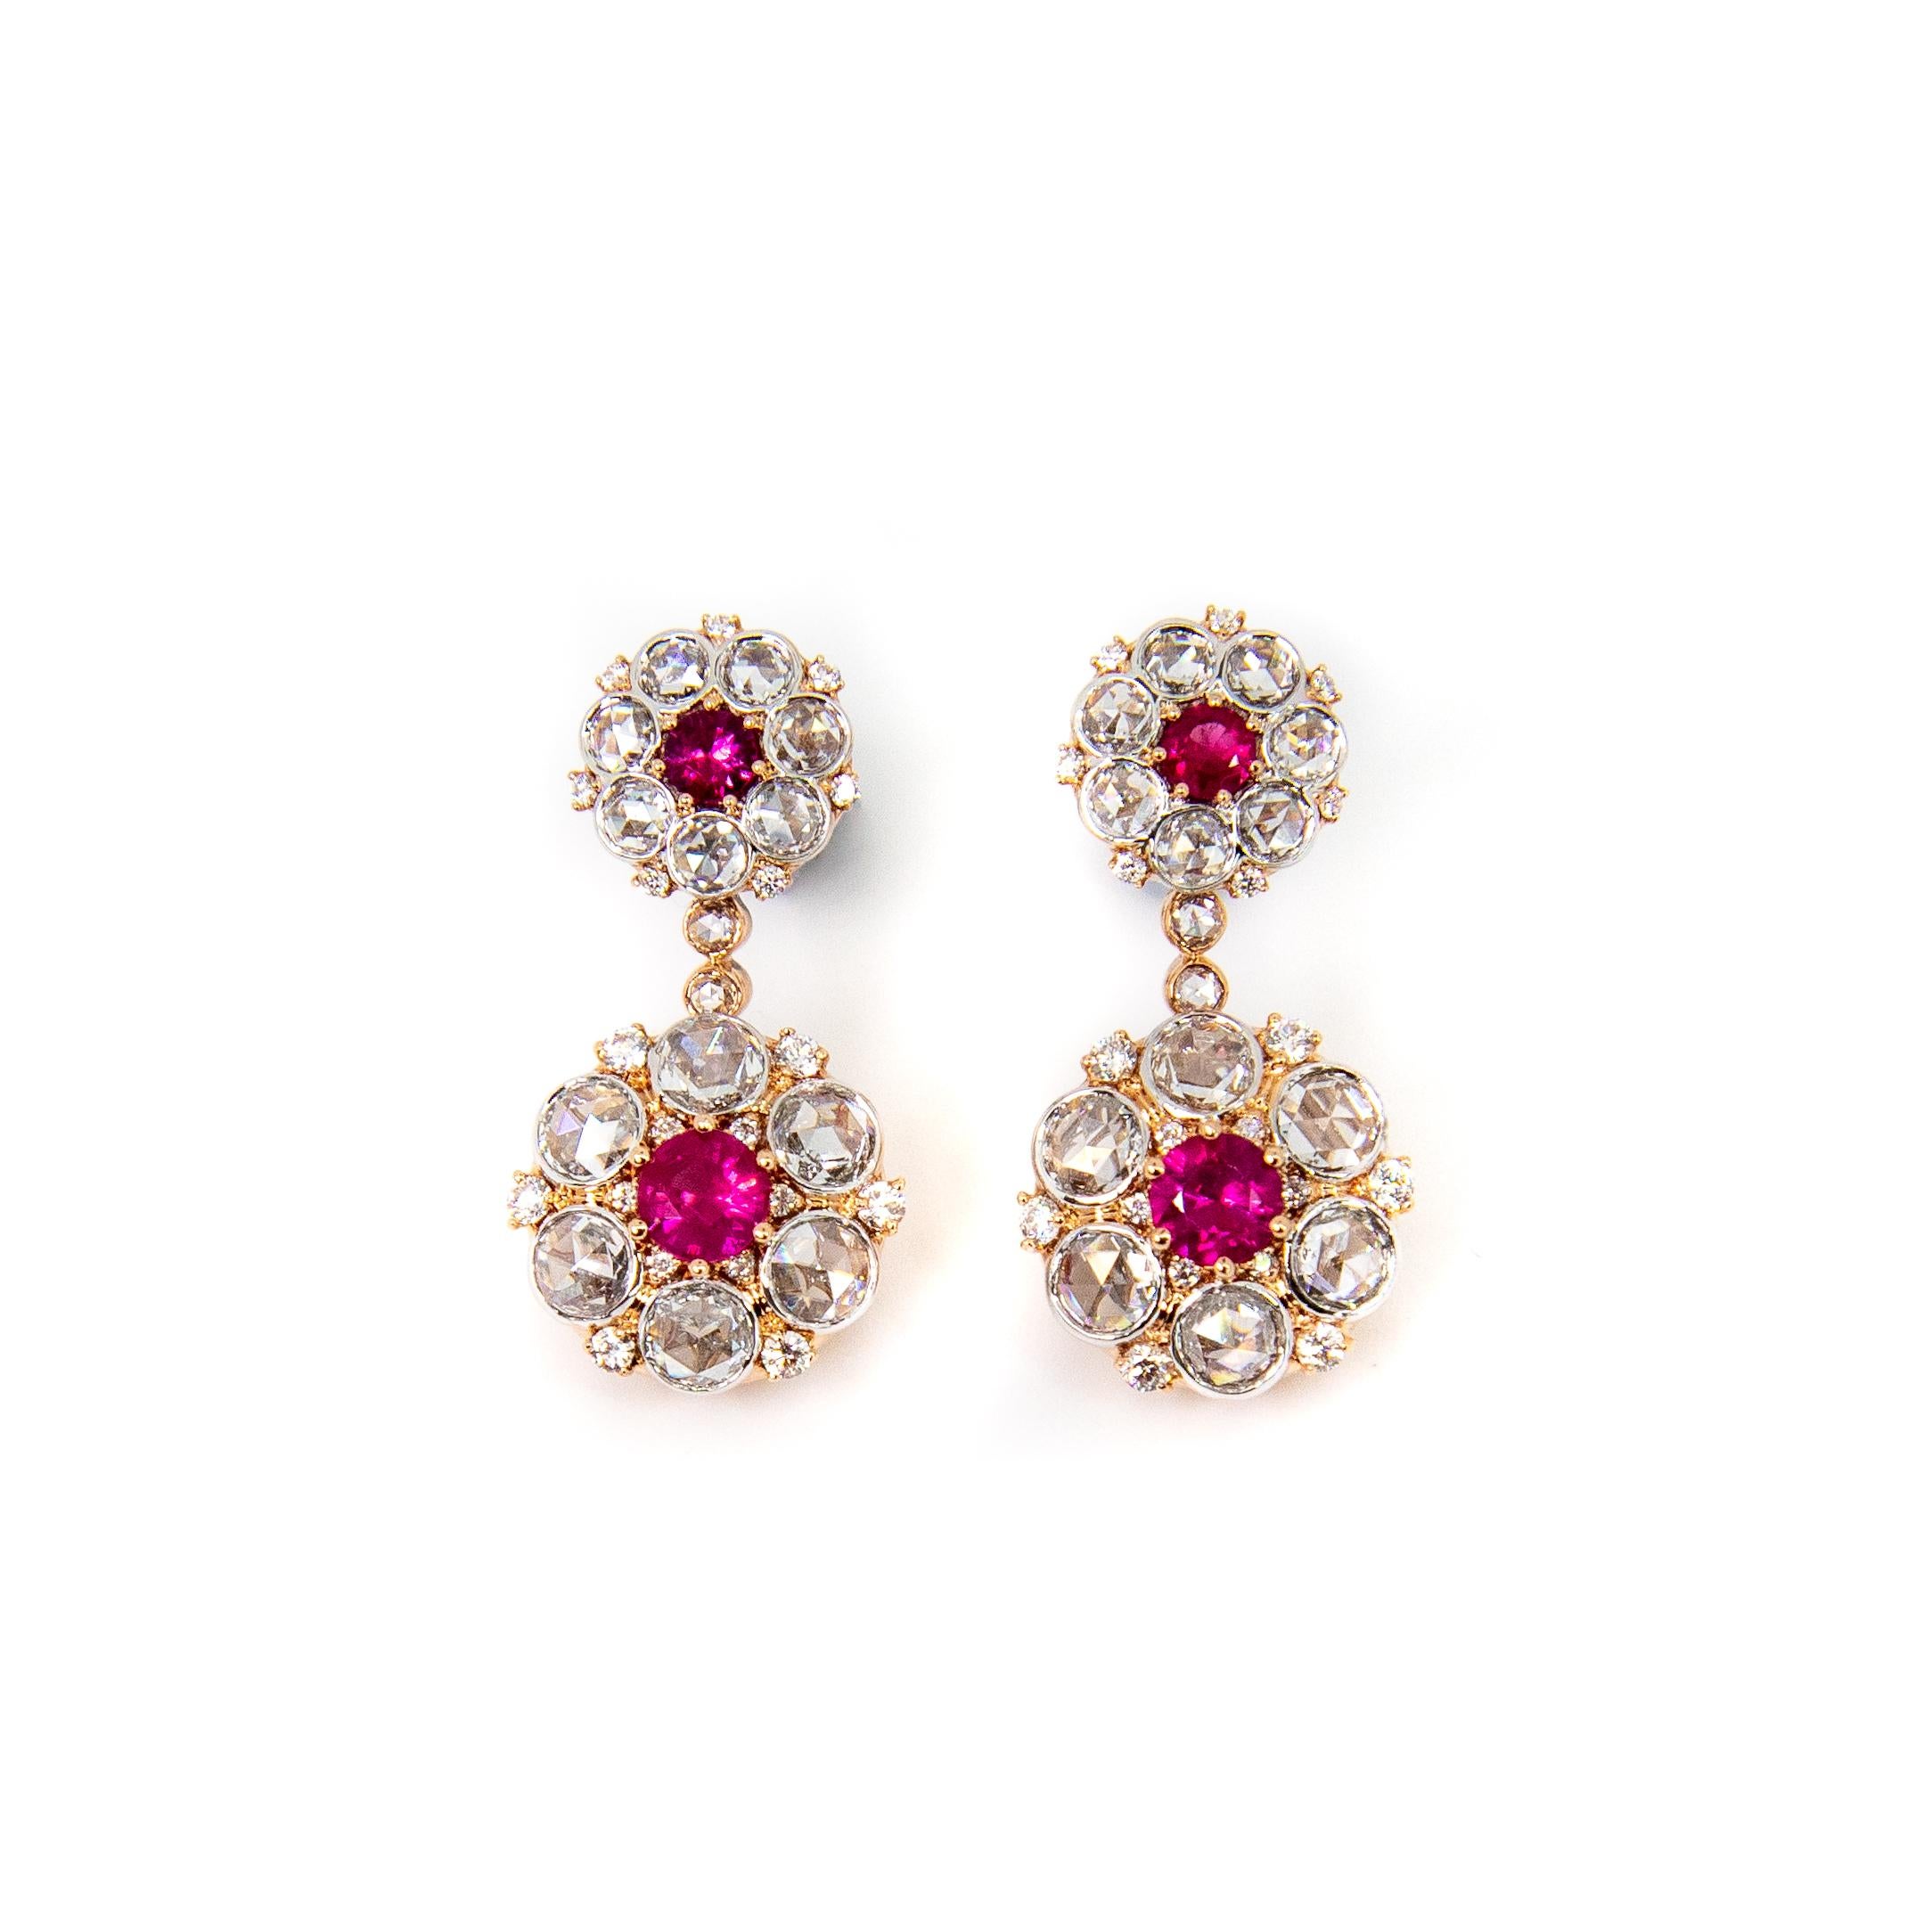 Beautiful ruby and rose cut diamond earrings with ornate gallery setting.

1.03ct lively round Ruby with a vivid pink colour. 
2.41ct Rose Cut Round Diamonds, G colour and VS clarity. 
0.29ct Round Brilliant Diamonds, G colour and VS clarity.

Set